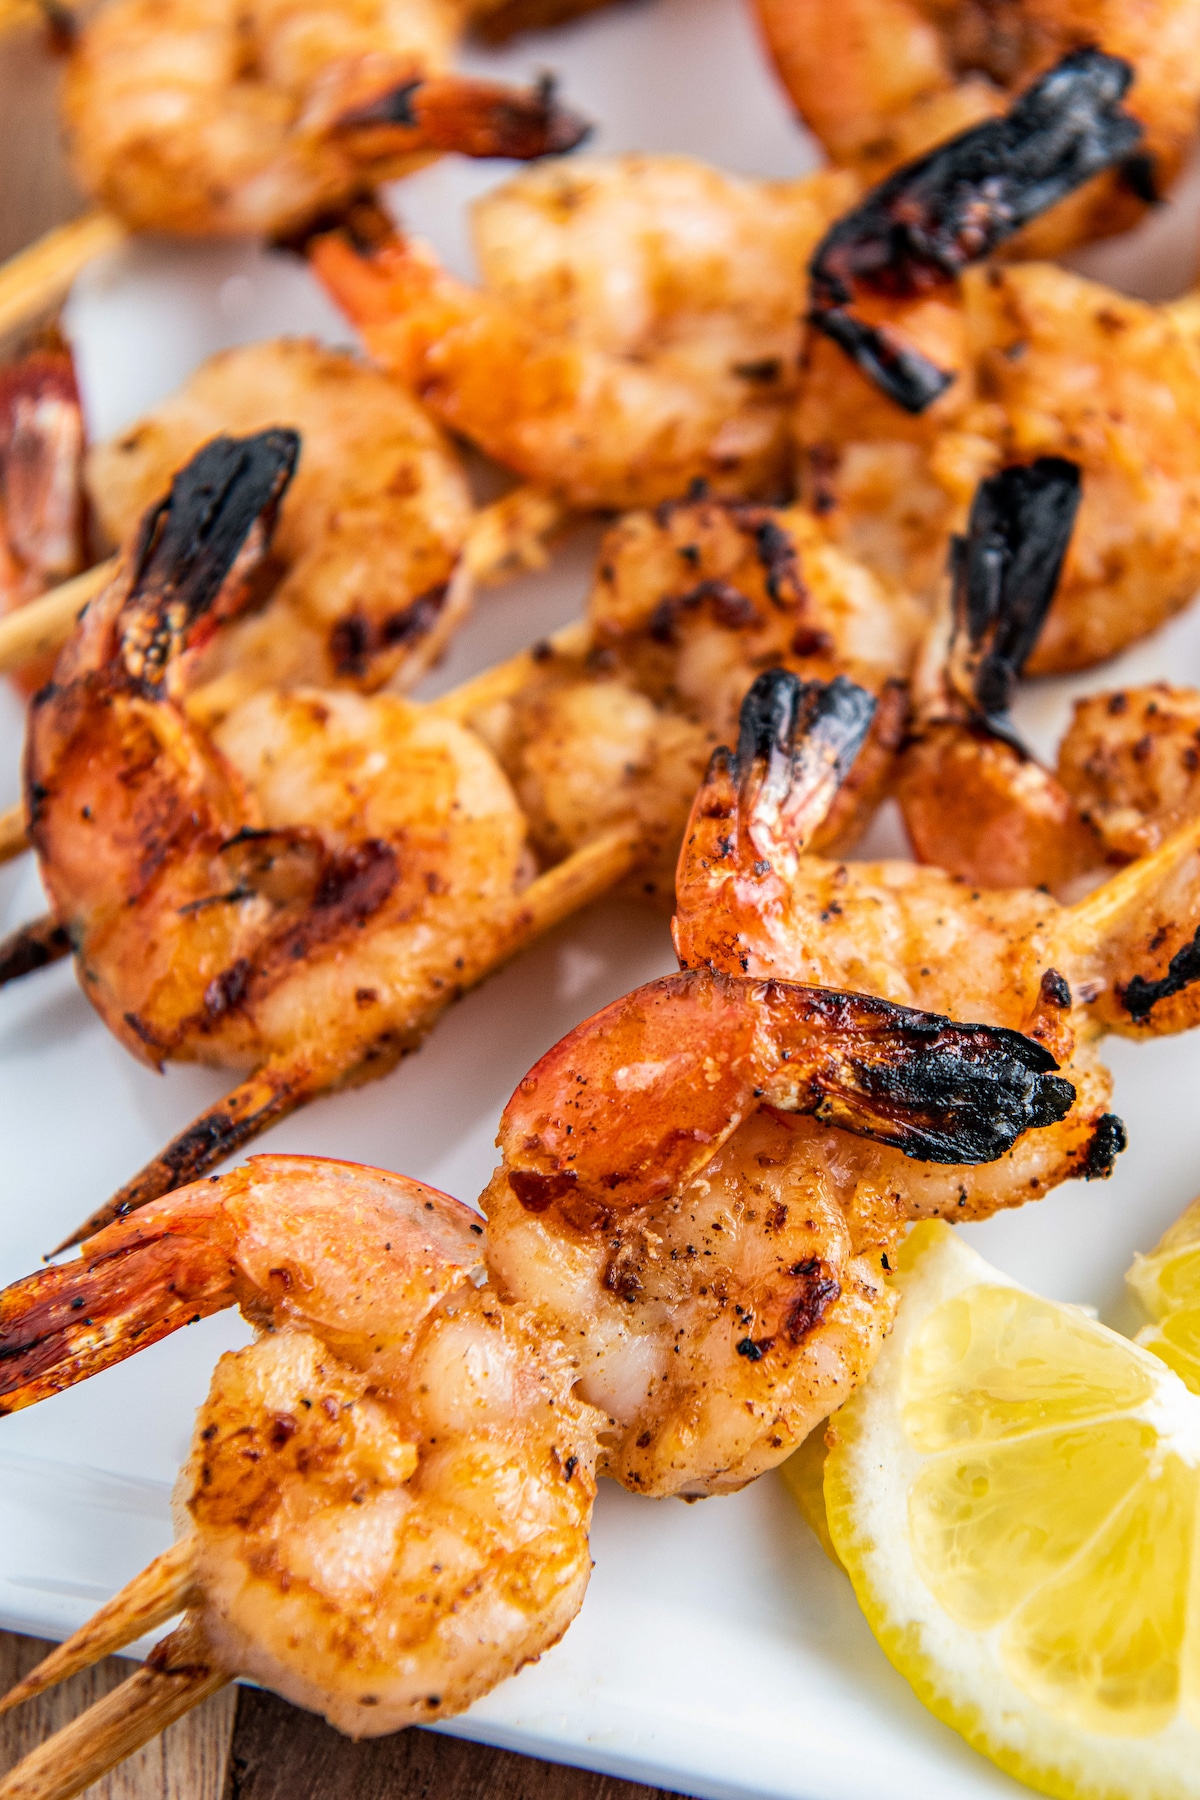 Grilled shrimp on skewers on a white plate with lemon.